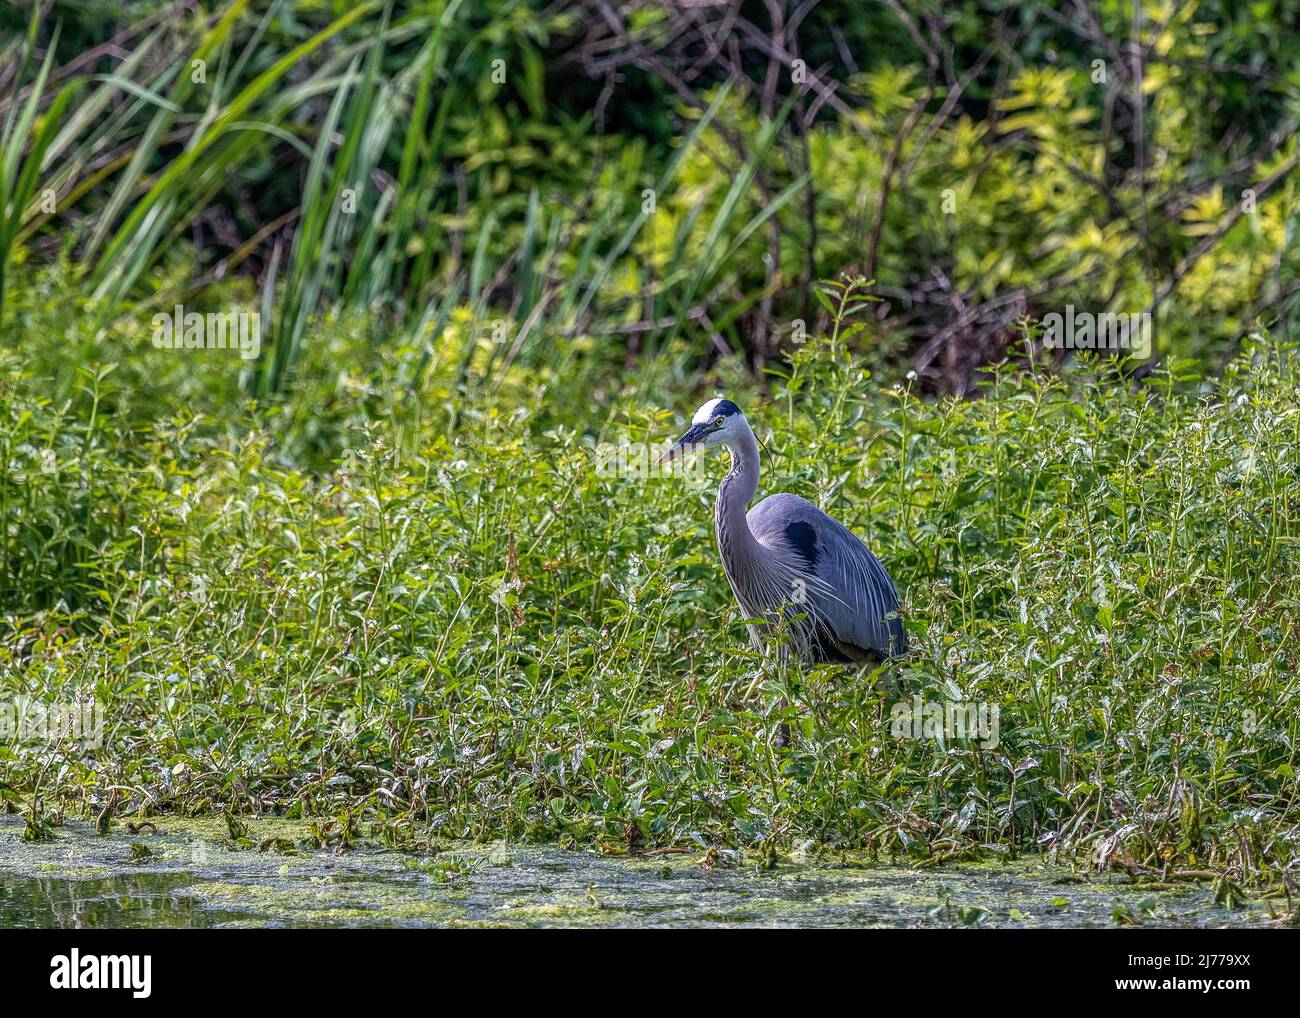 Great Blue heron at Sweetwater wetlands park, Gainesville Florida Stock Photo